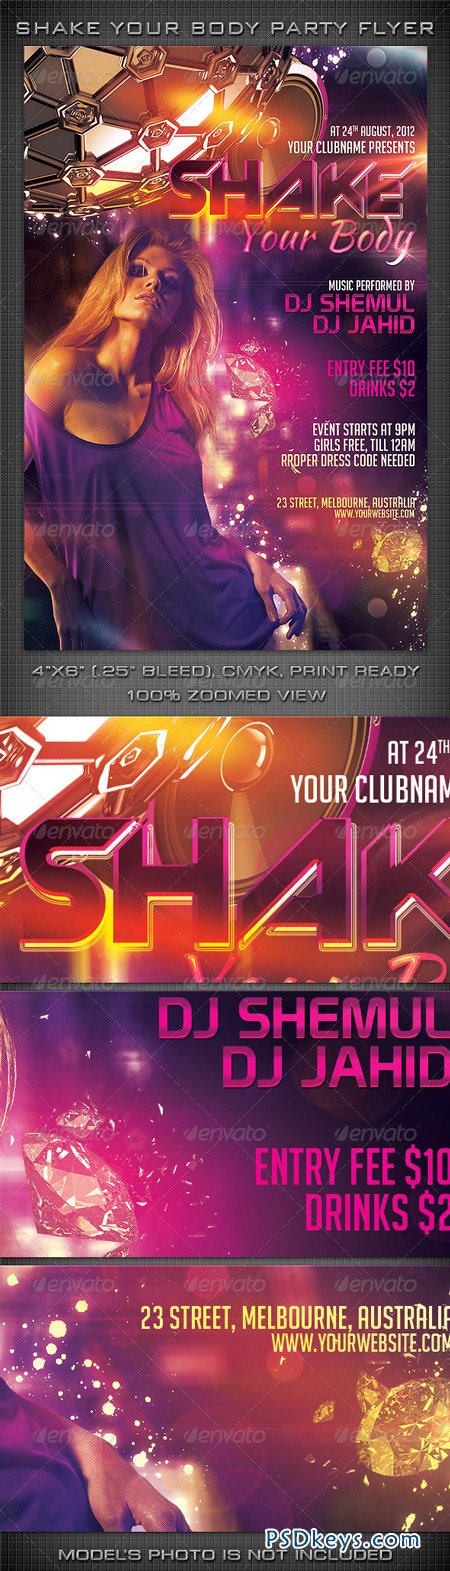 Shake Your Body Party Flyer 4959294